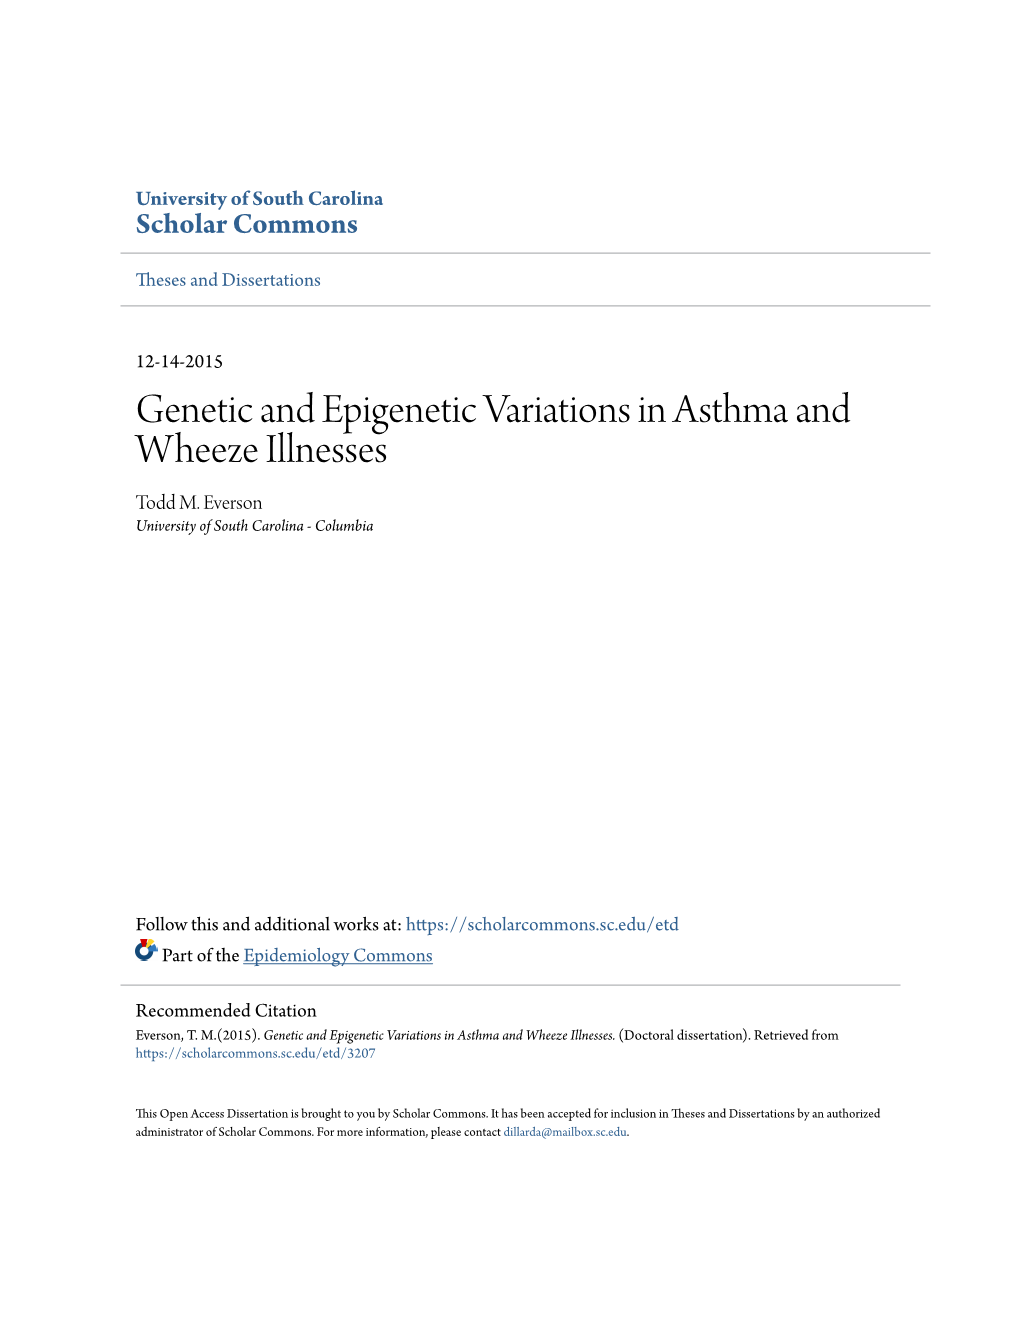 Genetic and Epigenetic Variations in Asthma and Wheeze Illnesses Todd M